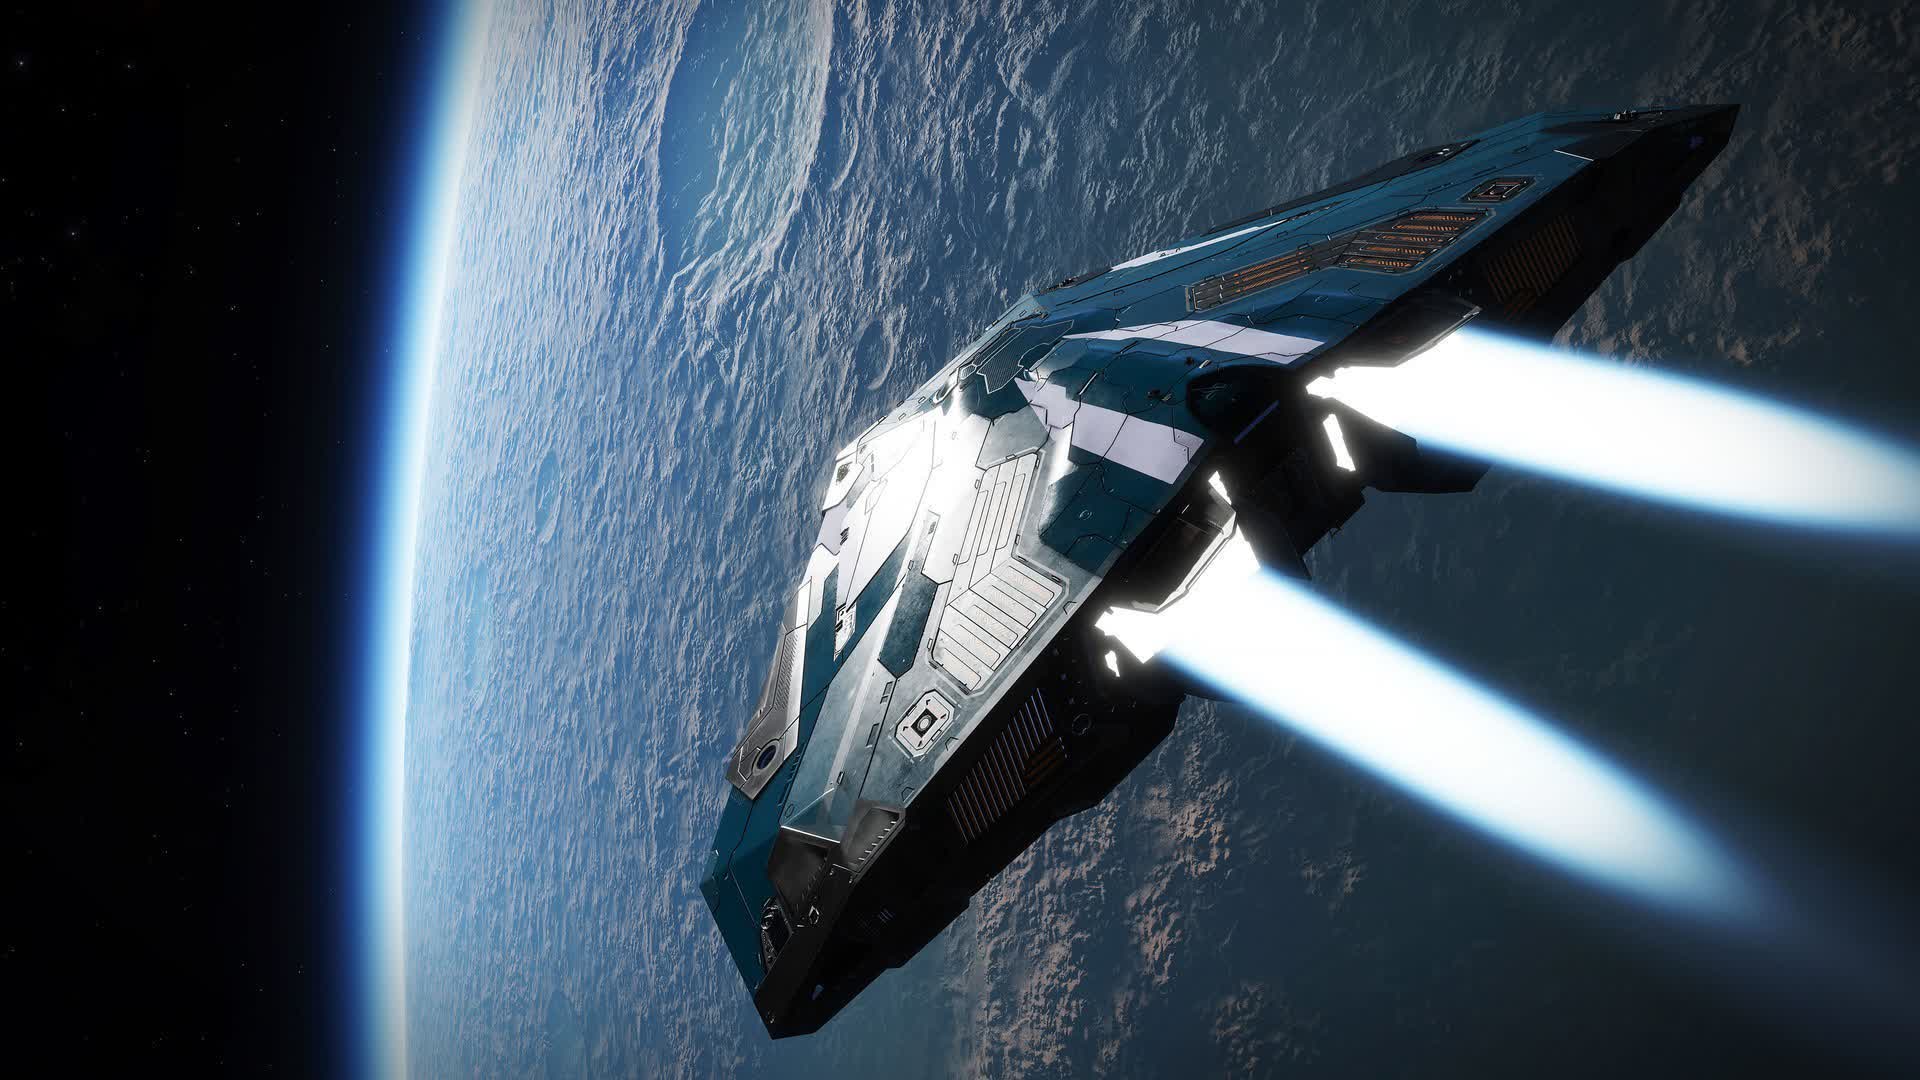 Elite Dangerous console players to receive free PC copies